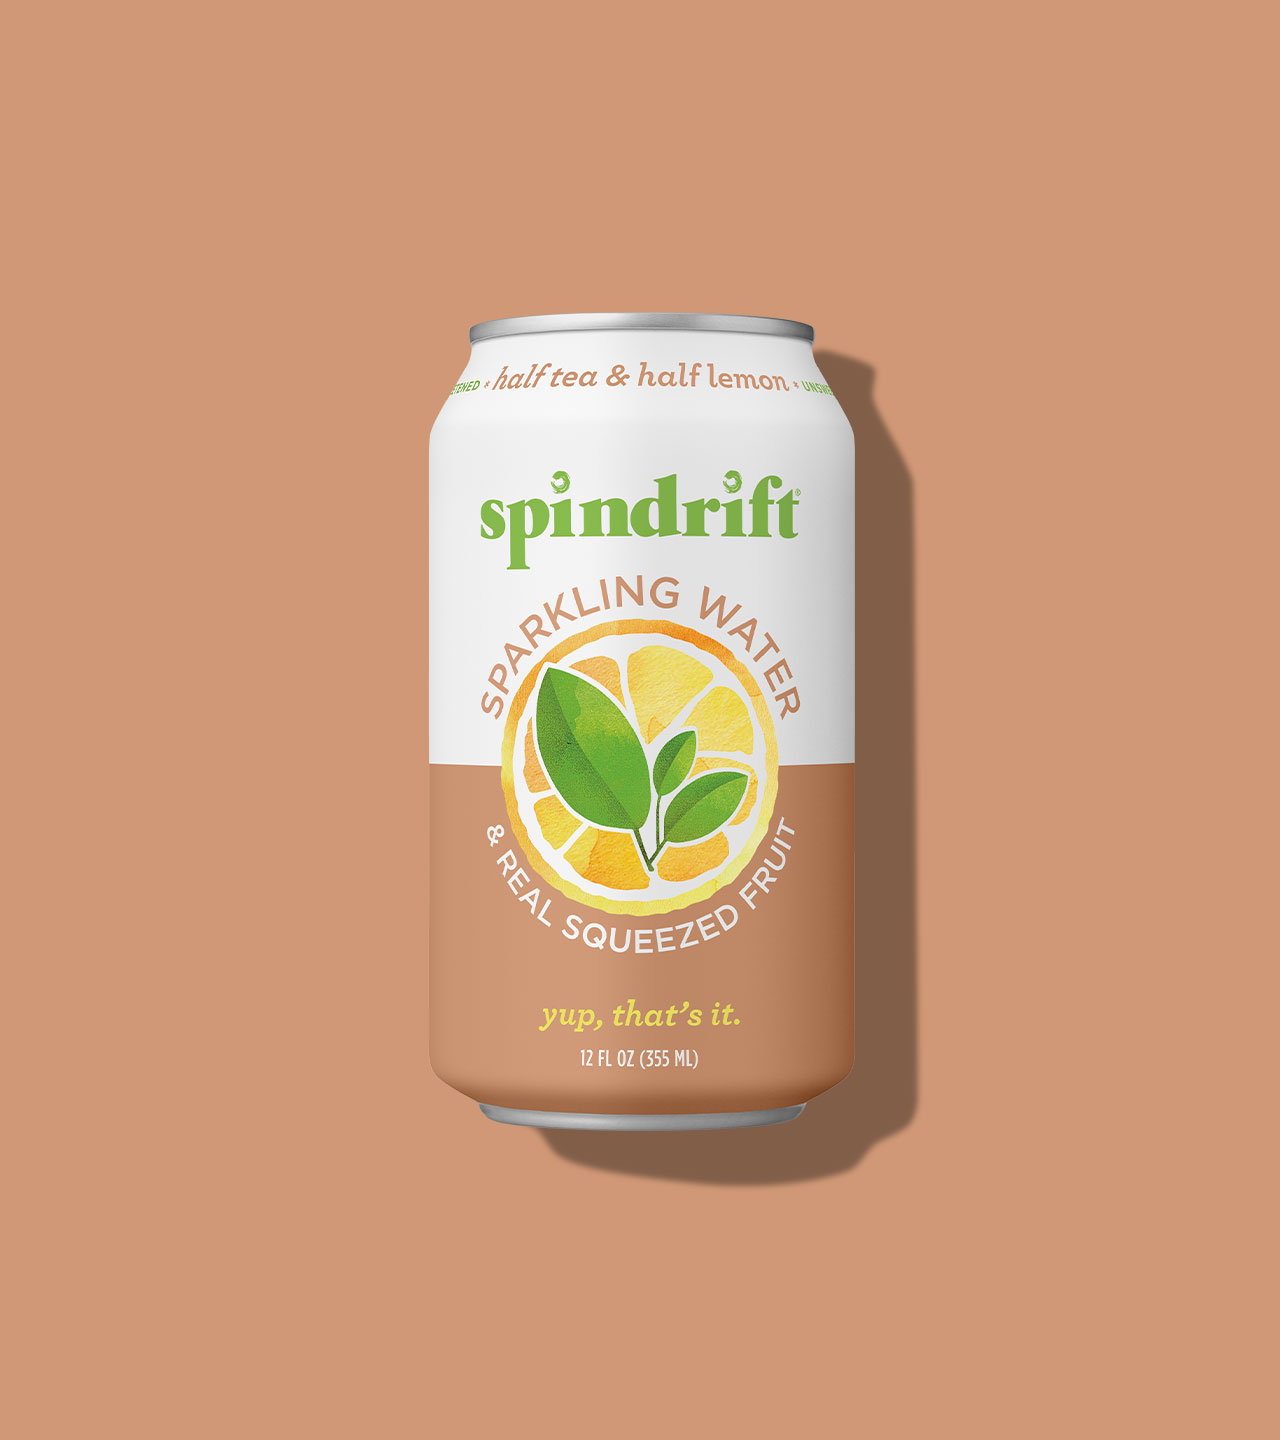 Spindrift Tea Packaging, Branding and Design by Colony